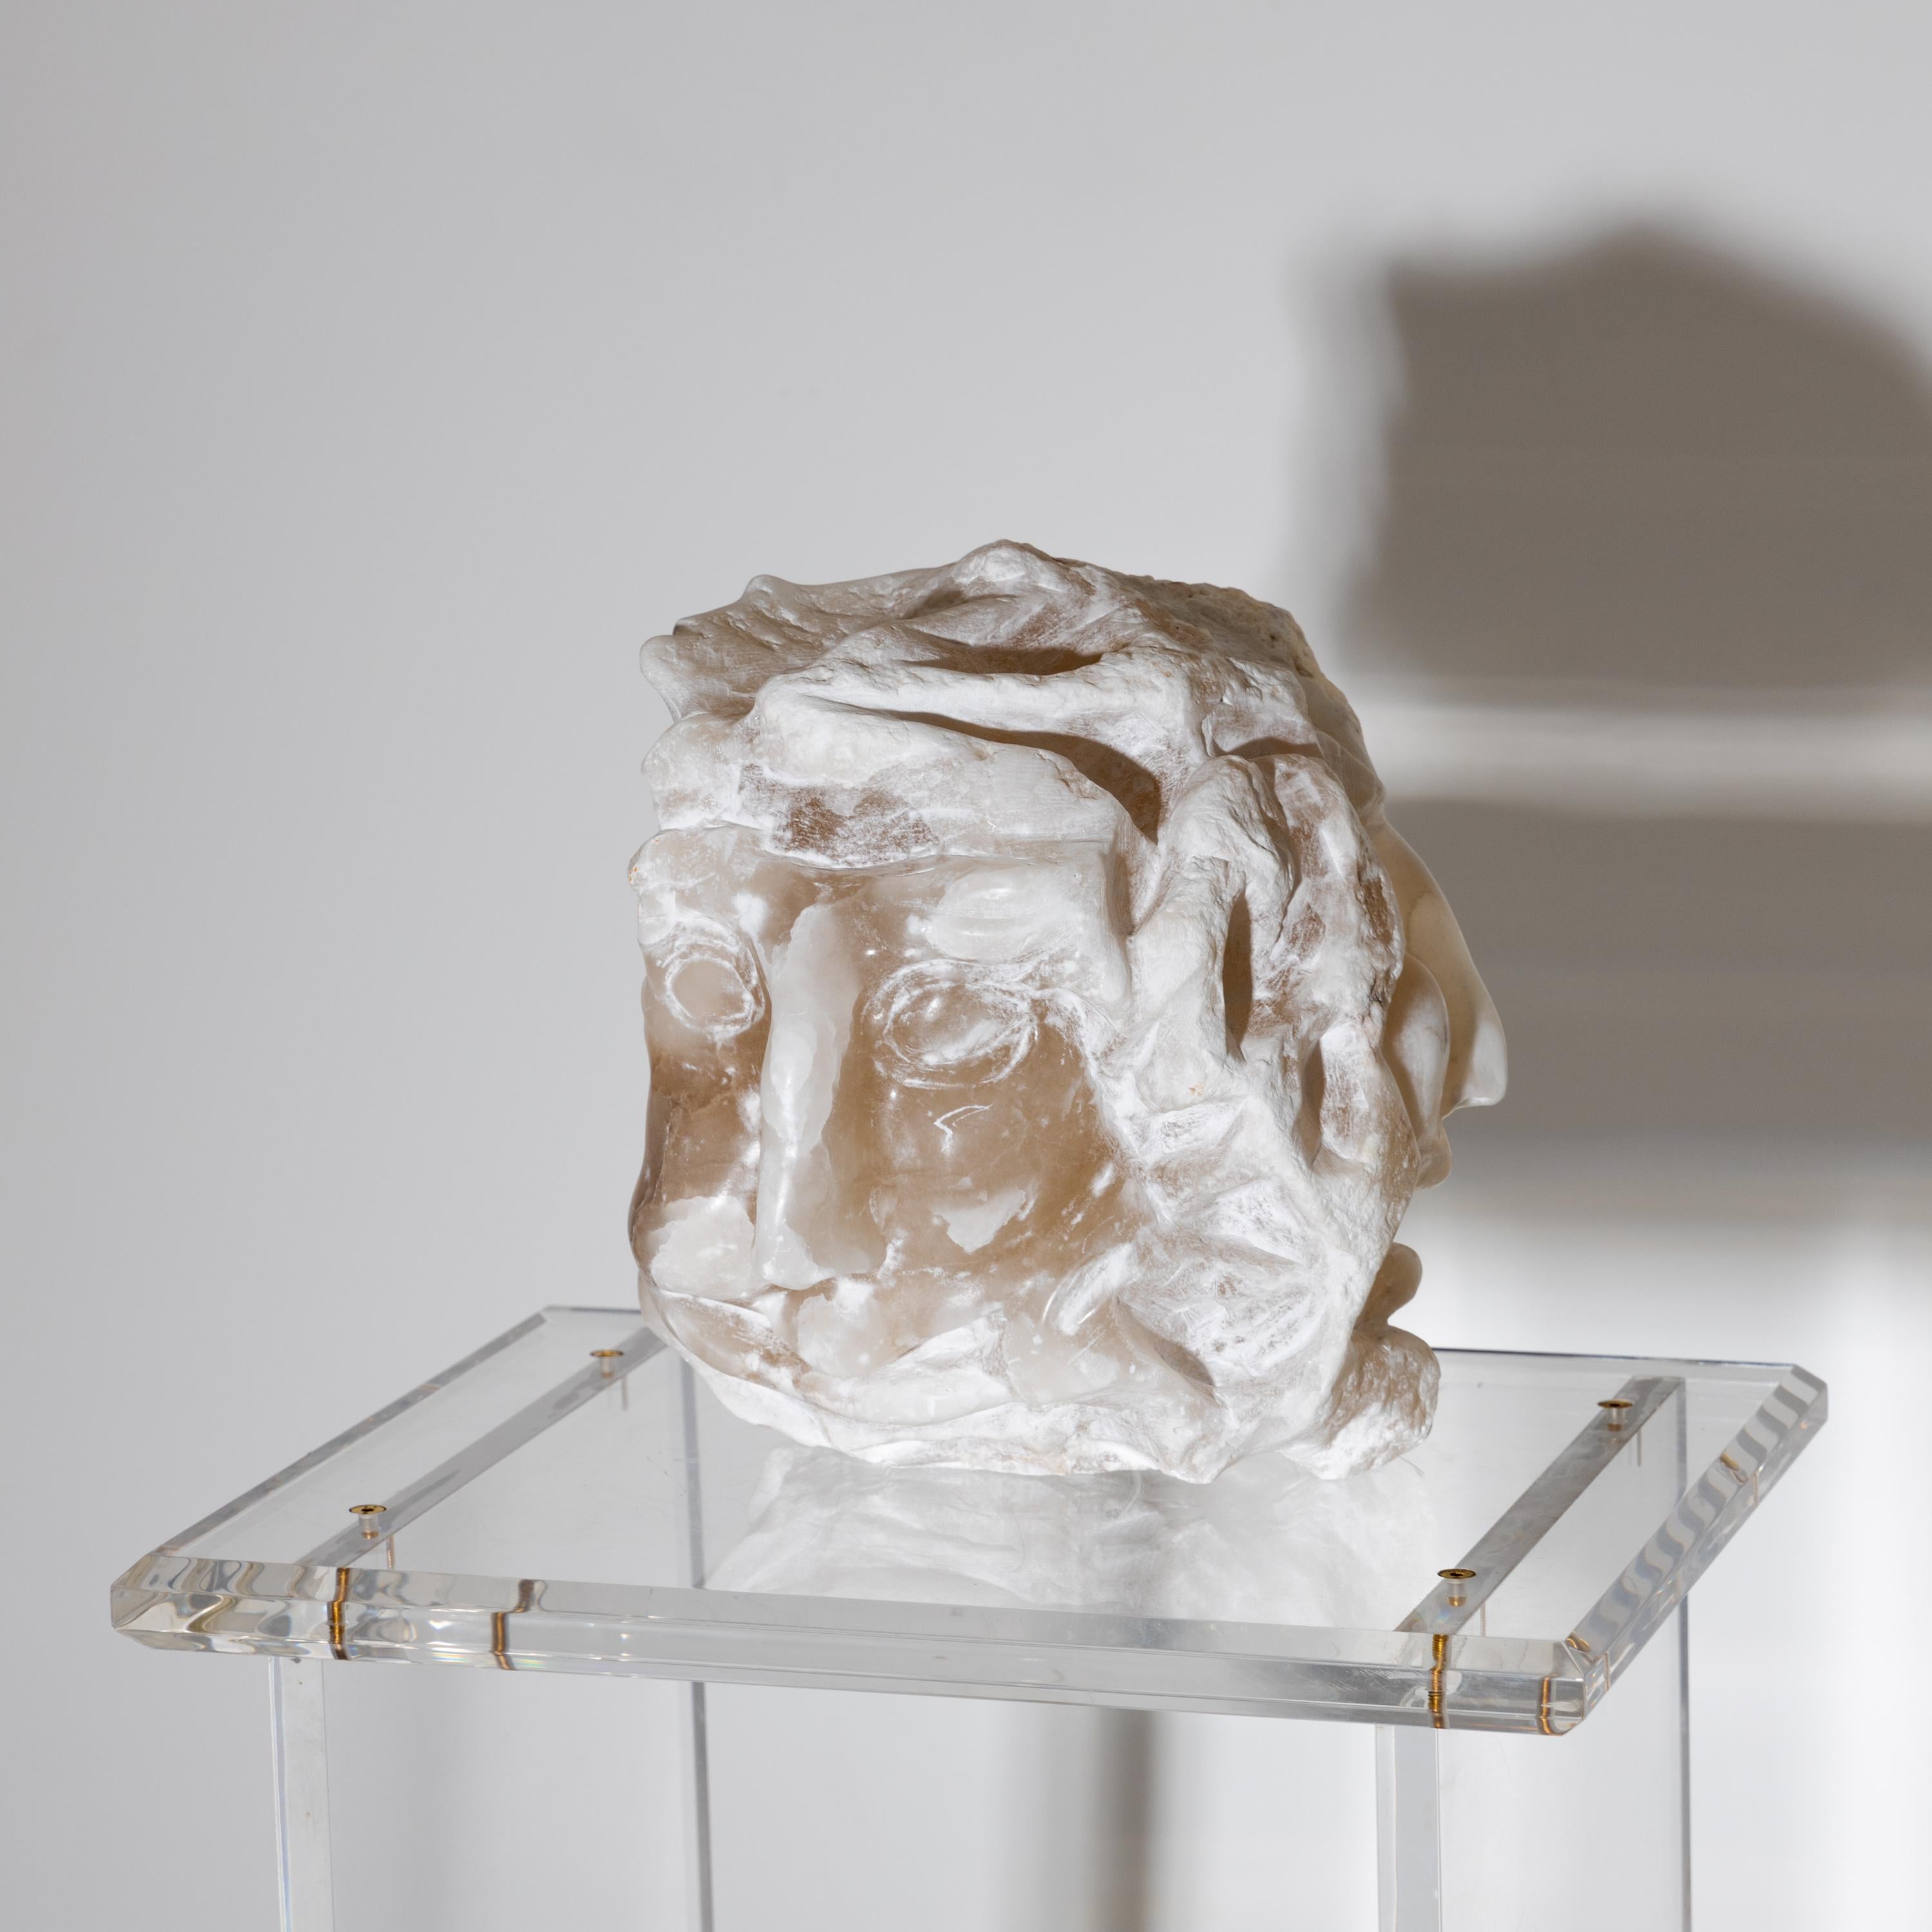 Sculpture of an abstracted head hand-carved from alabaster.